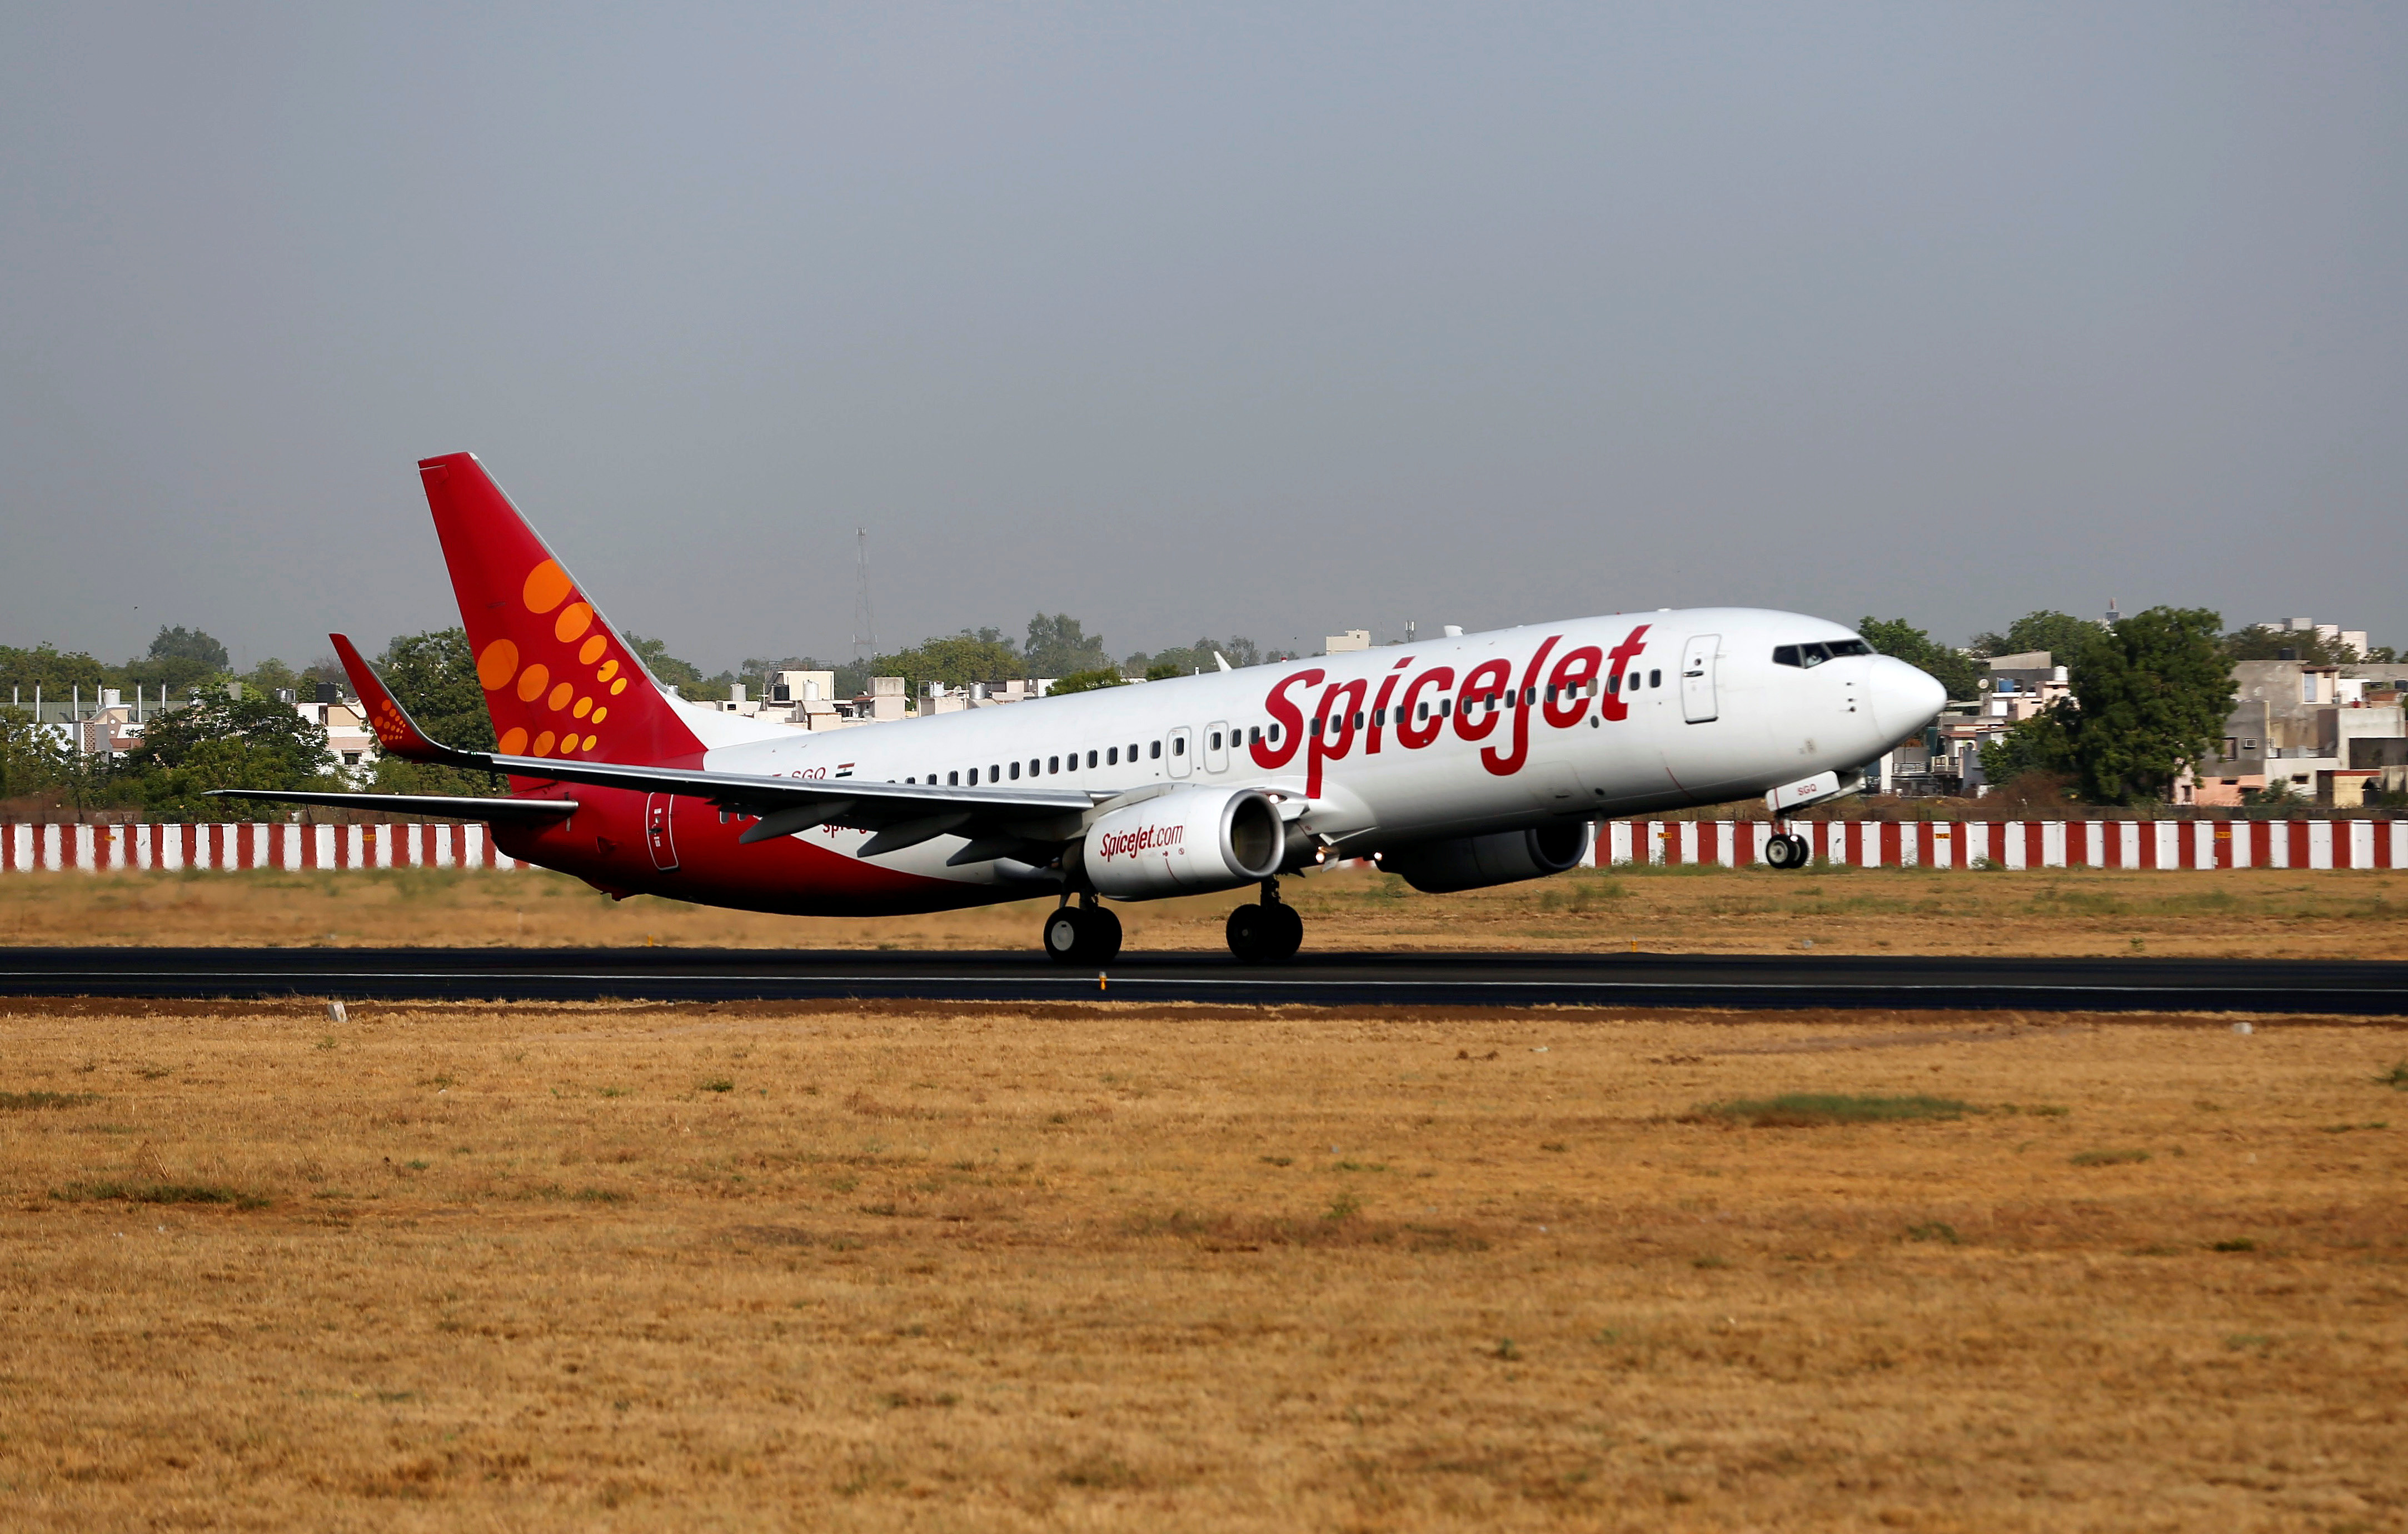 A SpiceJet Boeing 737 passenger aircraft takes off from Sardar Vallabhbhai Patel international airport in Ahmedabad